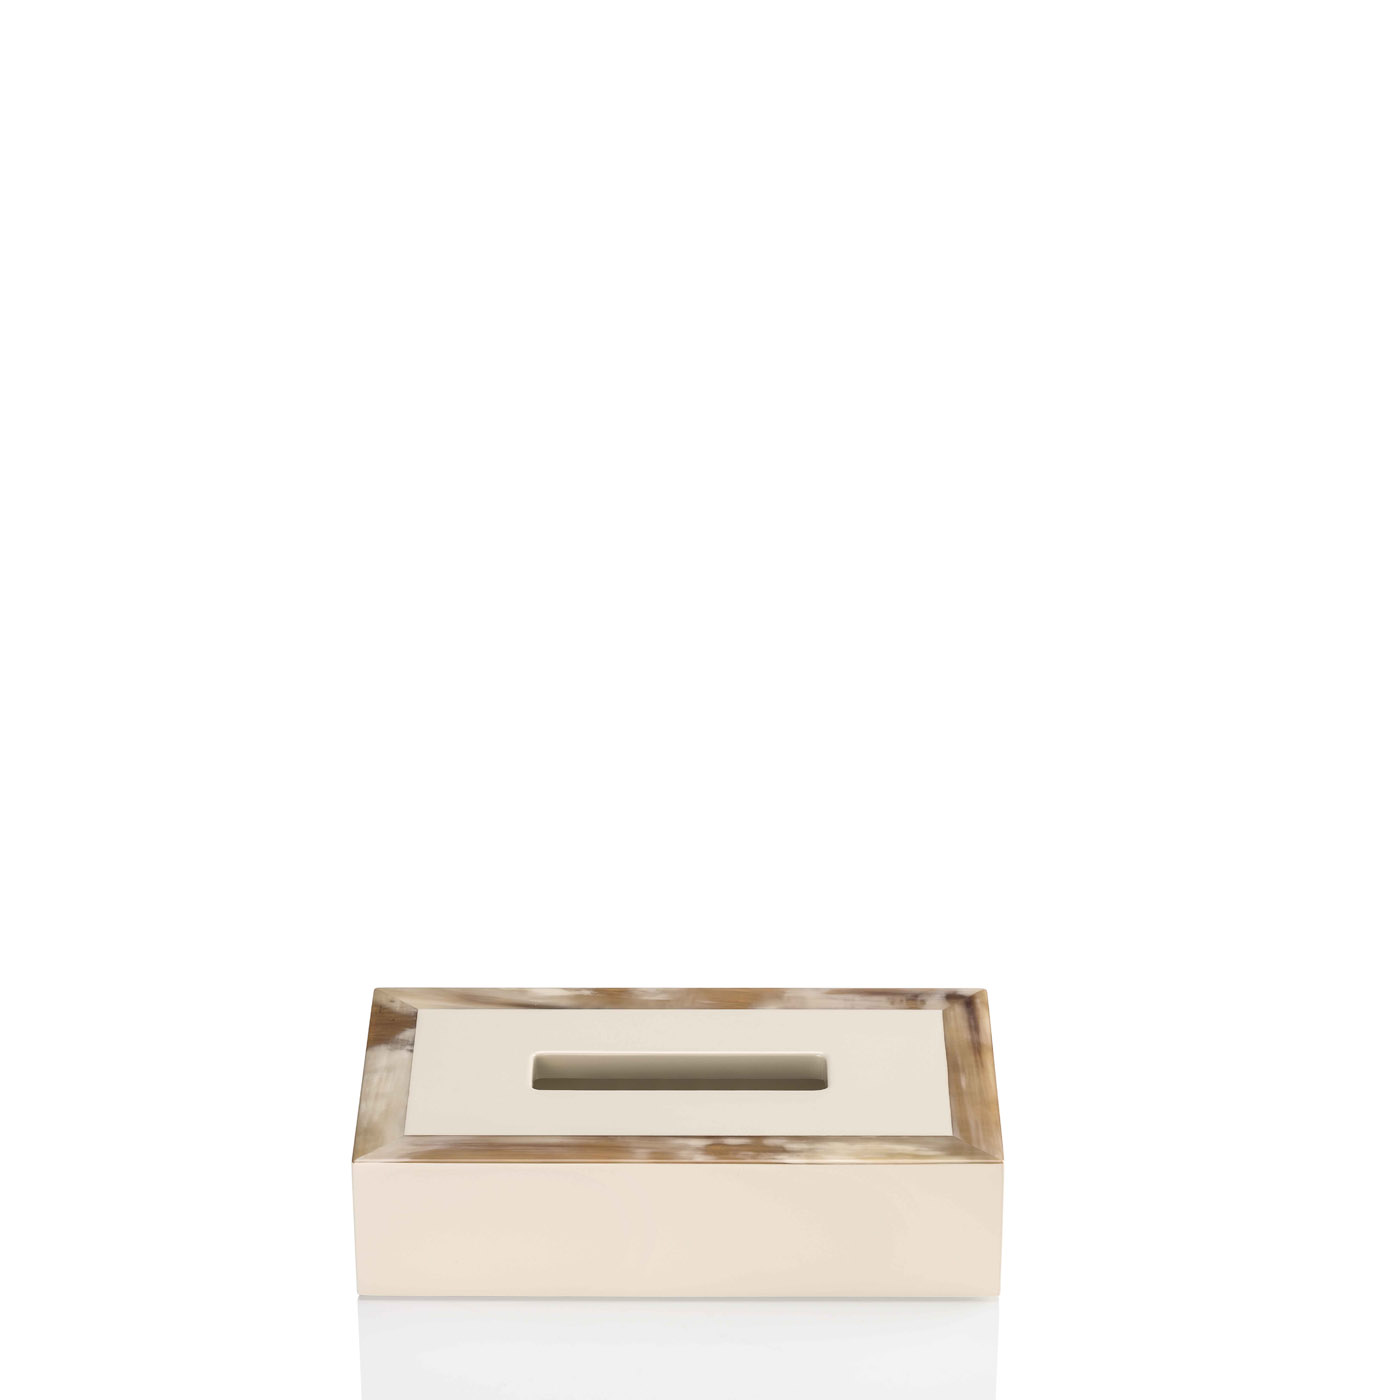 Office sets and smoking accessories - Geremia tissue box holder in horn and glossy ivory lacquered wood - detail - Arcahorn